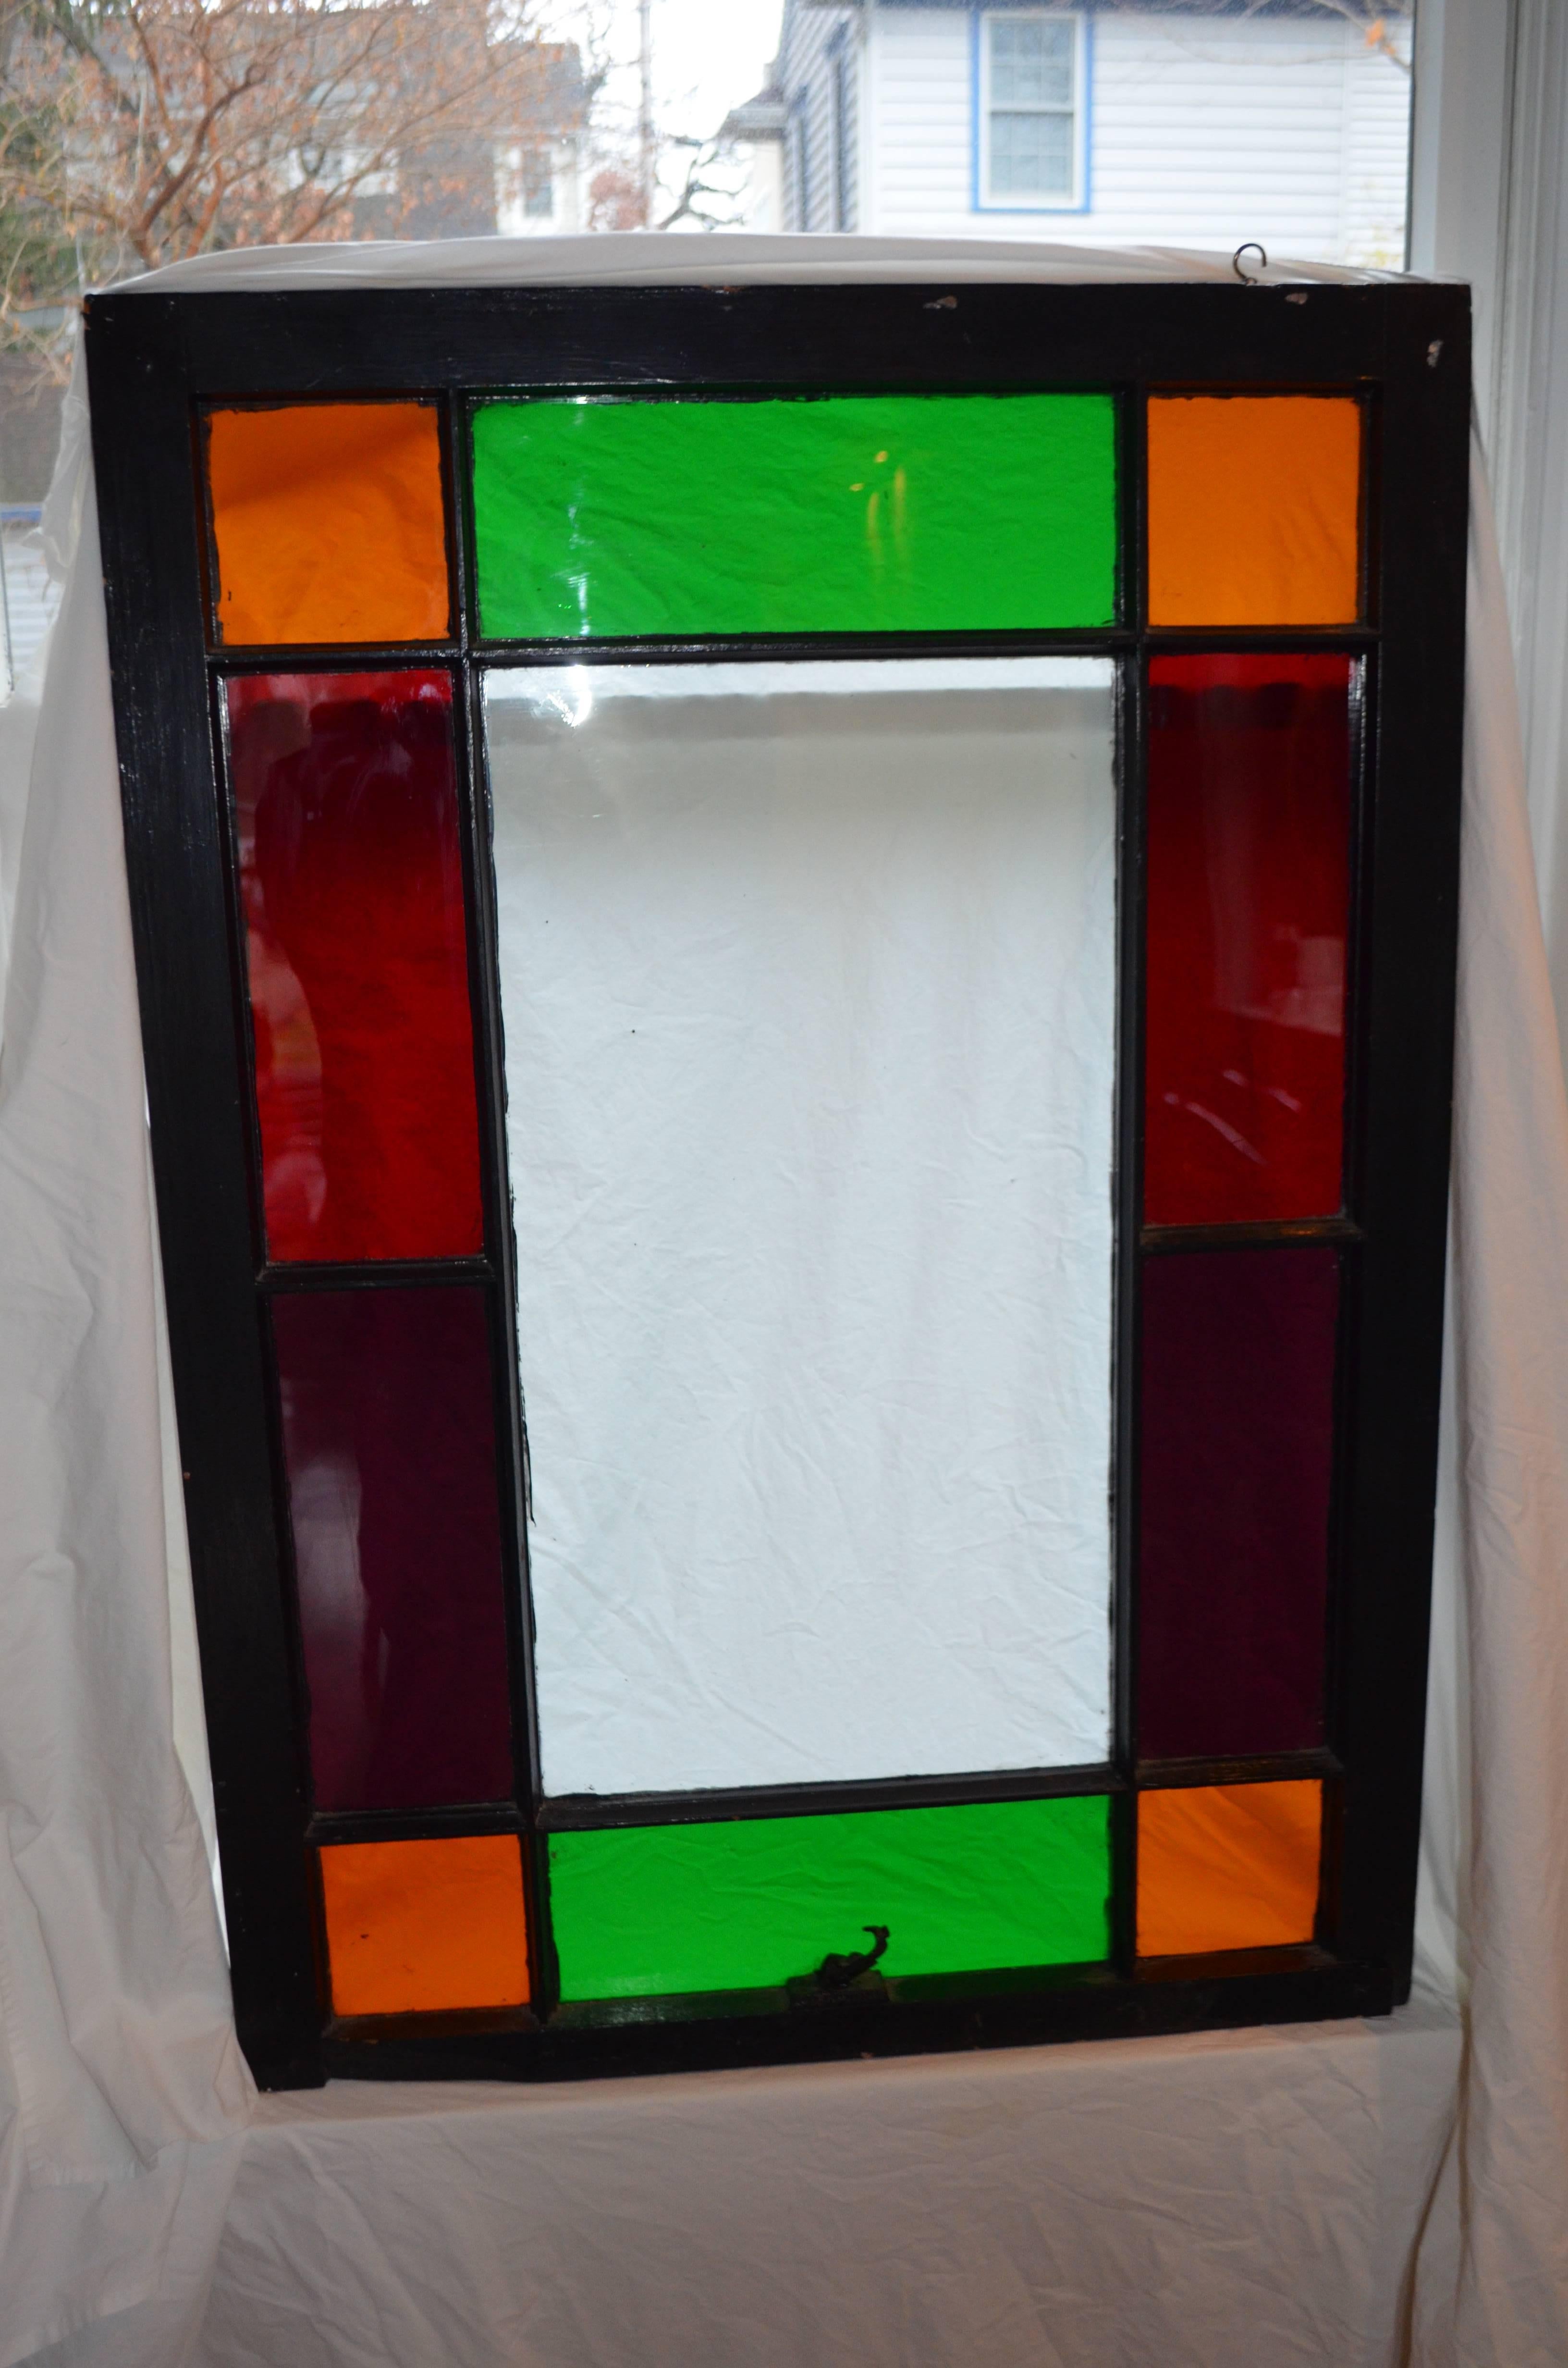 Stained glass window, once part of a double-hung set, now brings rich, vibrant colors into the home, enriching even the greyest of days. There's an Arts and Crafts quality to the colored panes and the way they are displayed. Mounted with hooks and